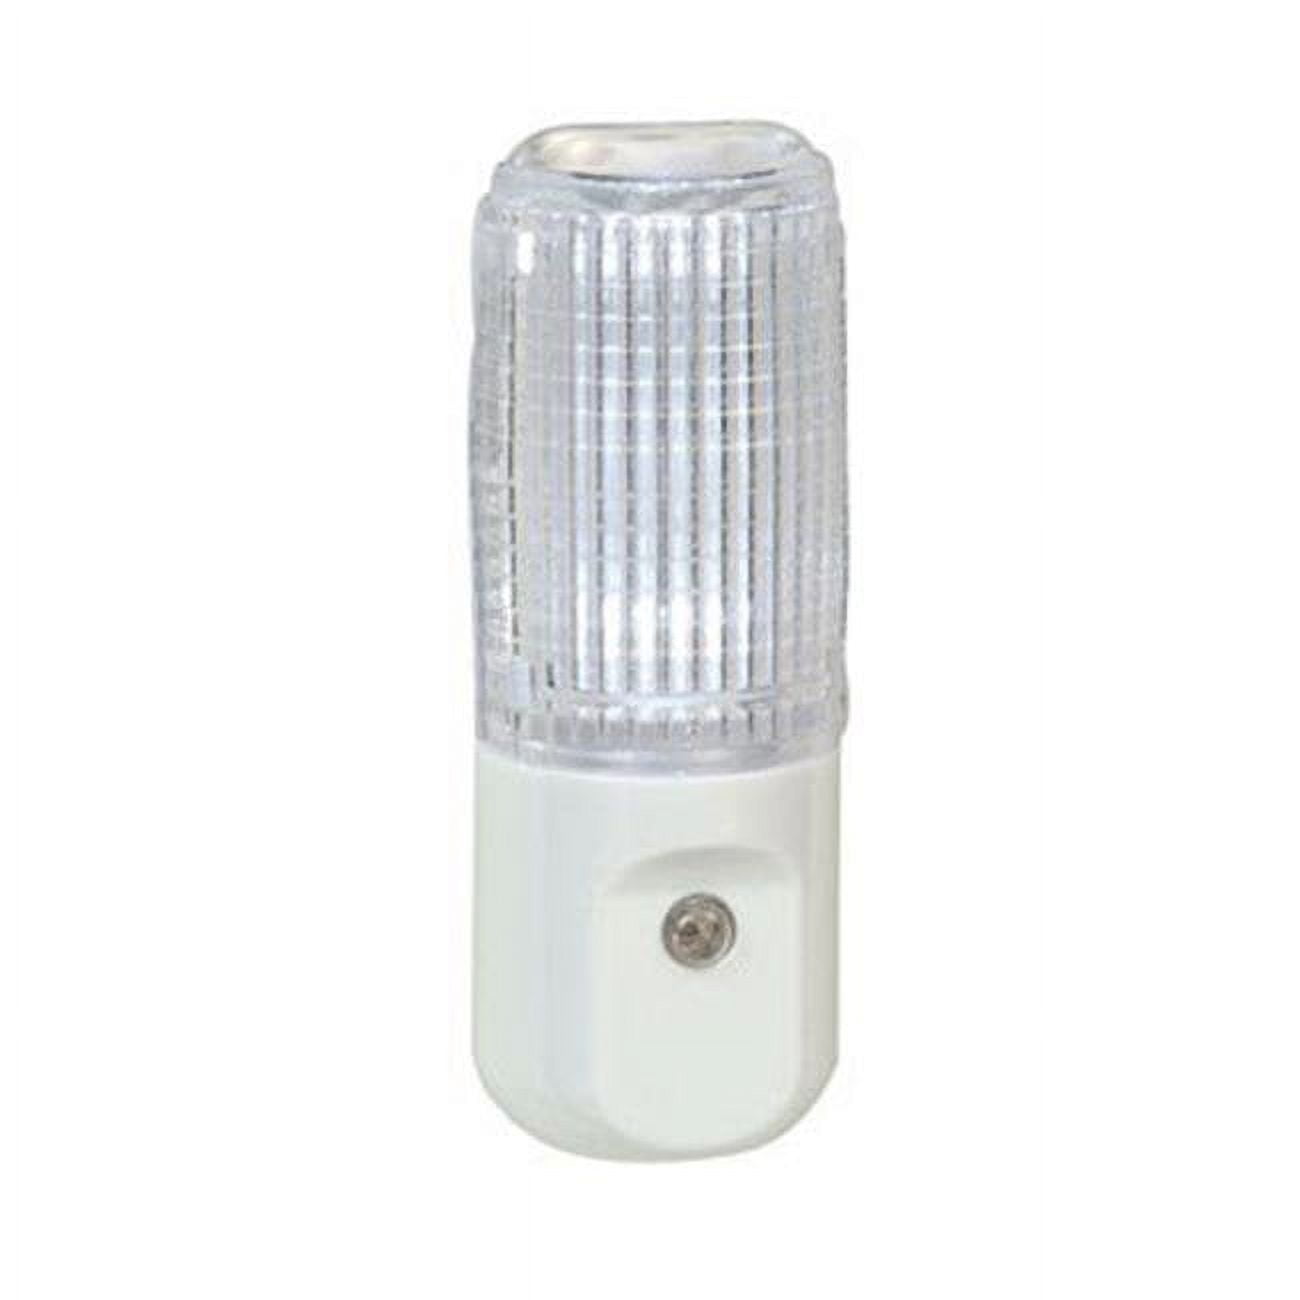 Picture of Amertac Holdings 3493442 Led Night Light White - 